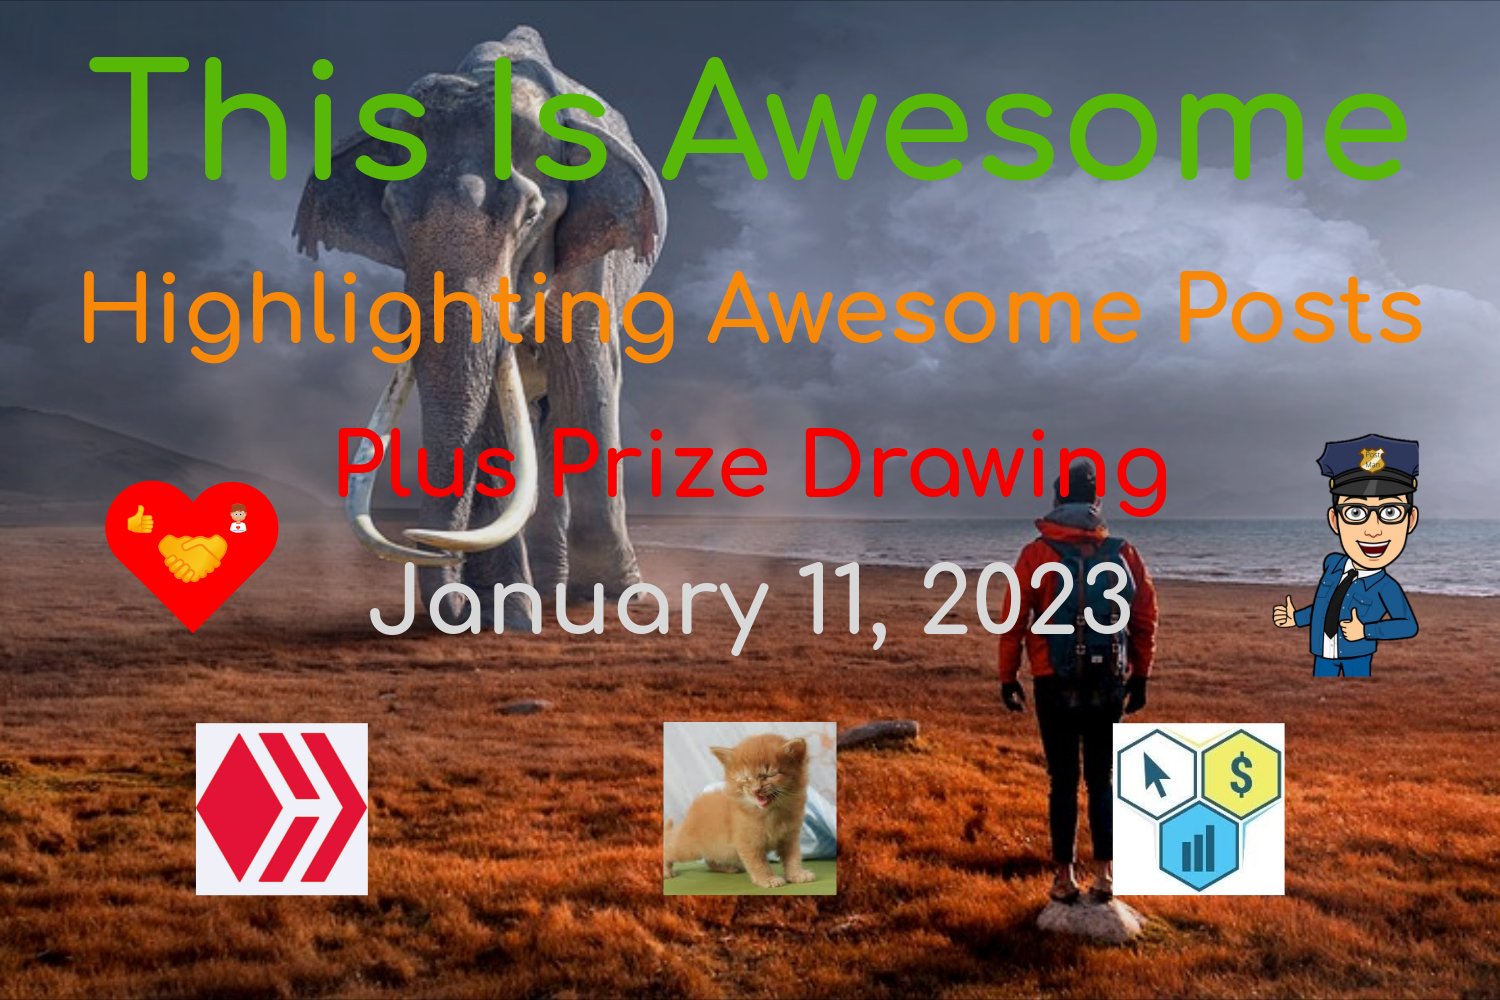 @thisisawesome/this-is-awesome-highlighting-awesome-posts-plus-prize-drawing-january-11-2023